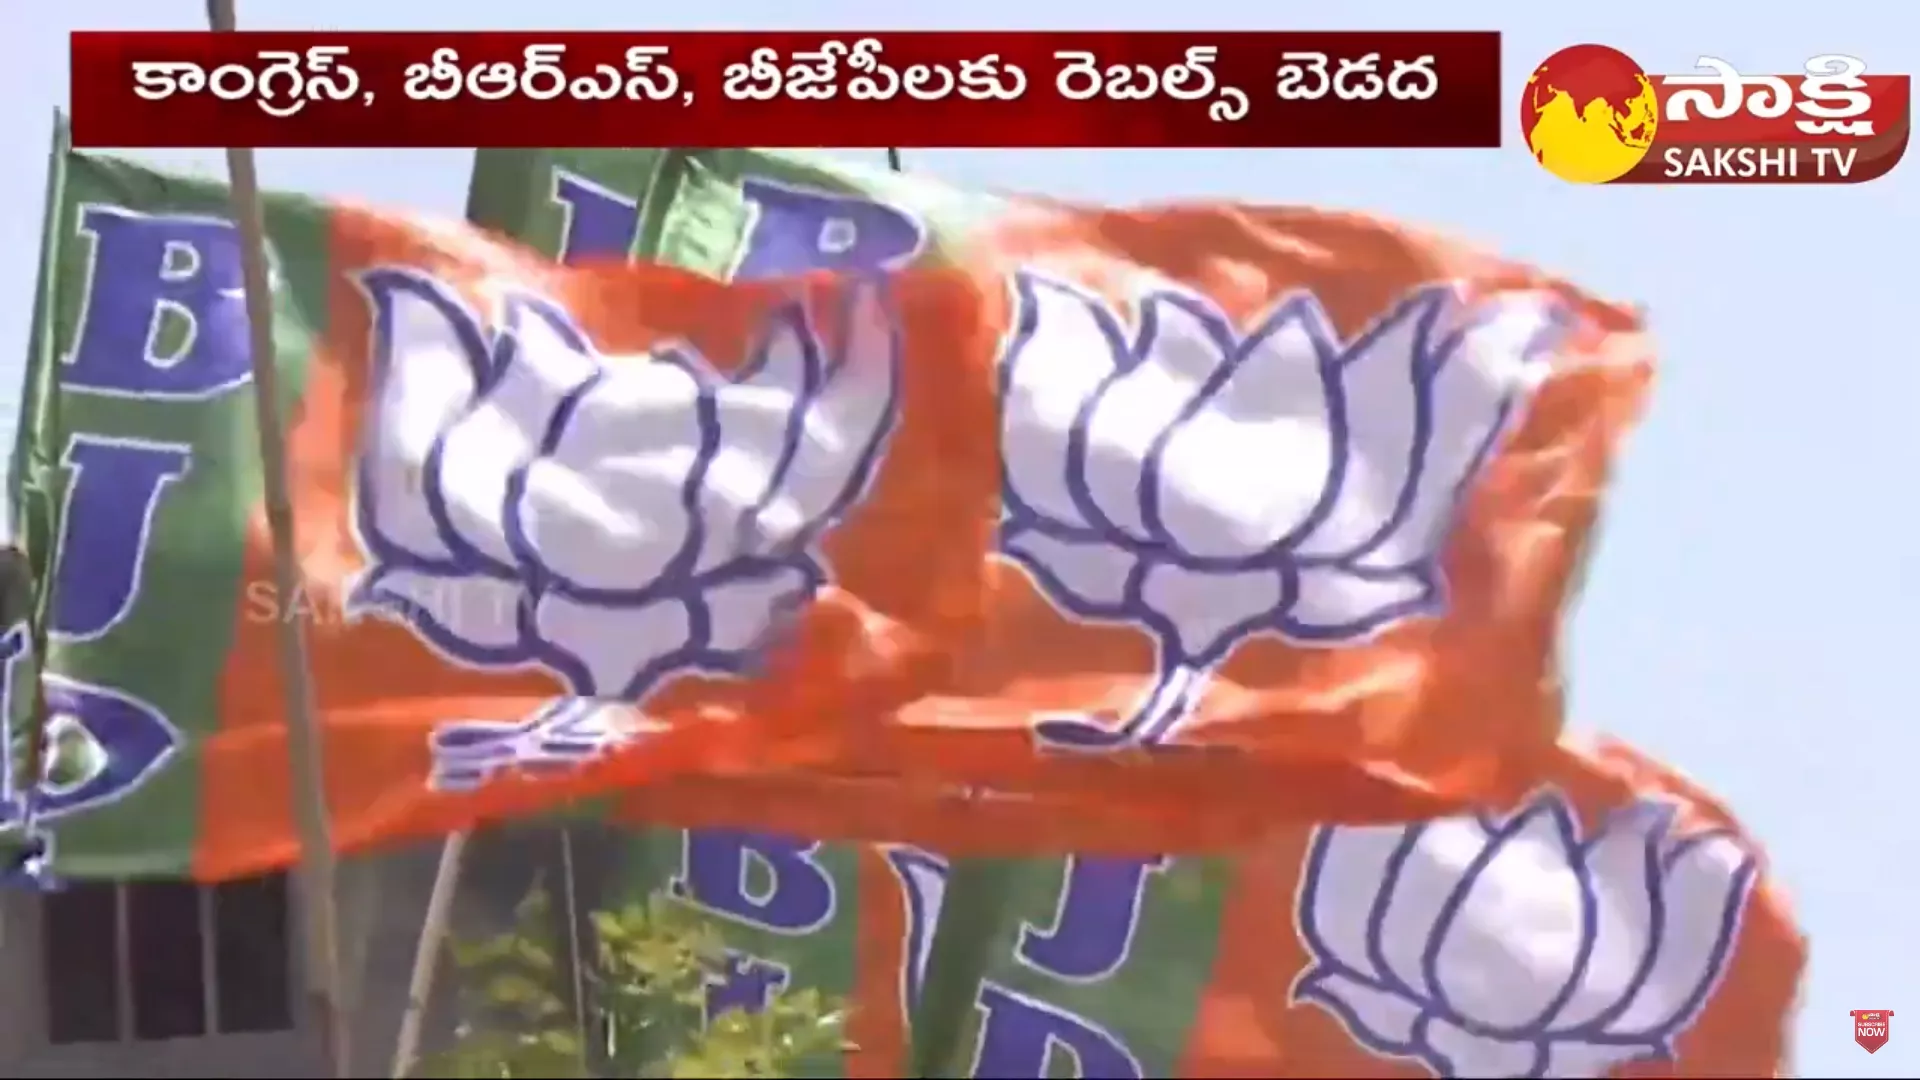 Rebels Tension to Congress Party Telangana Political League